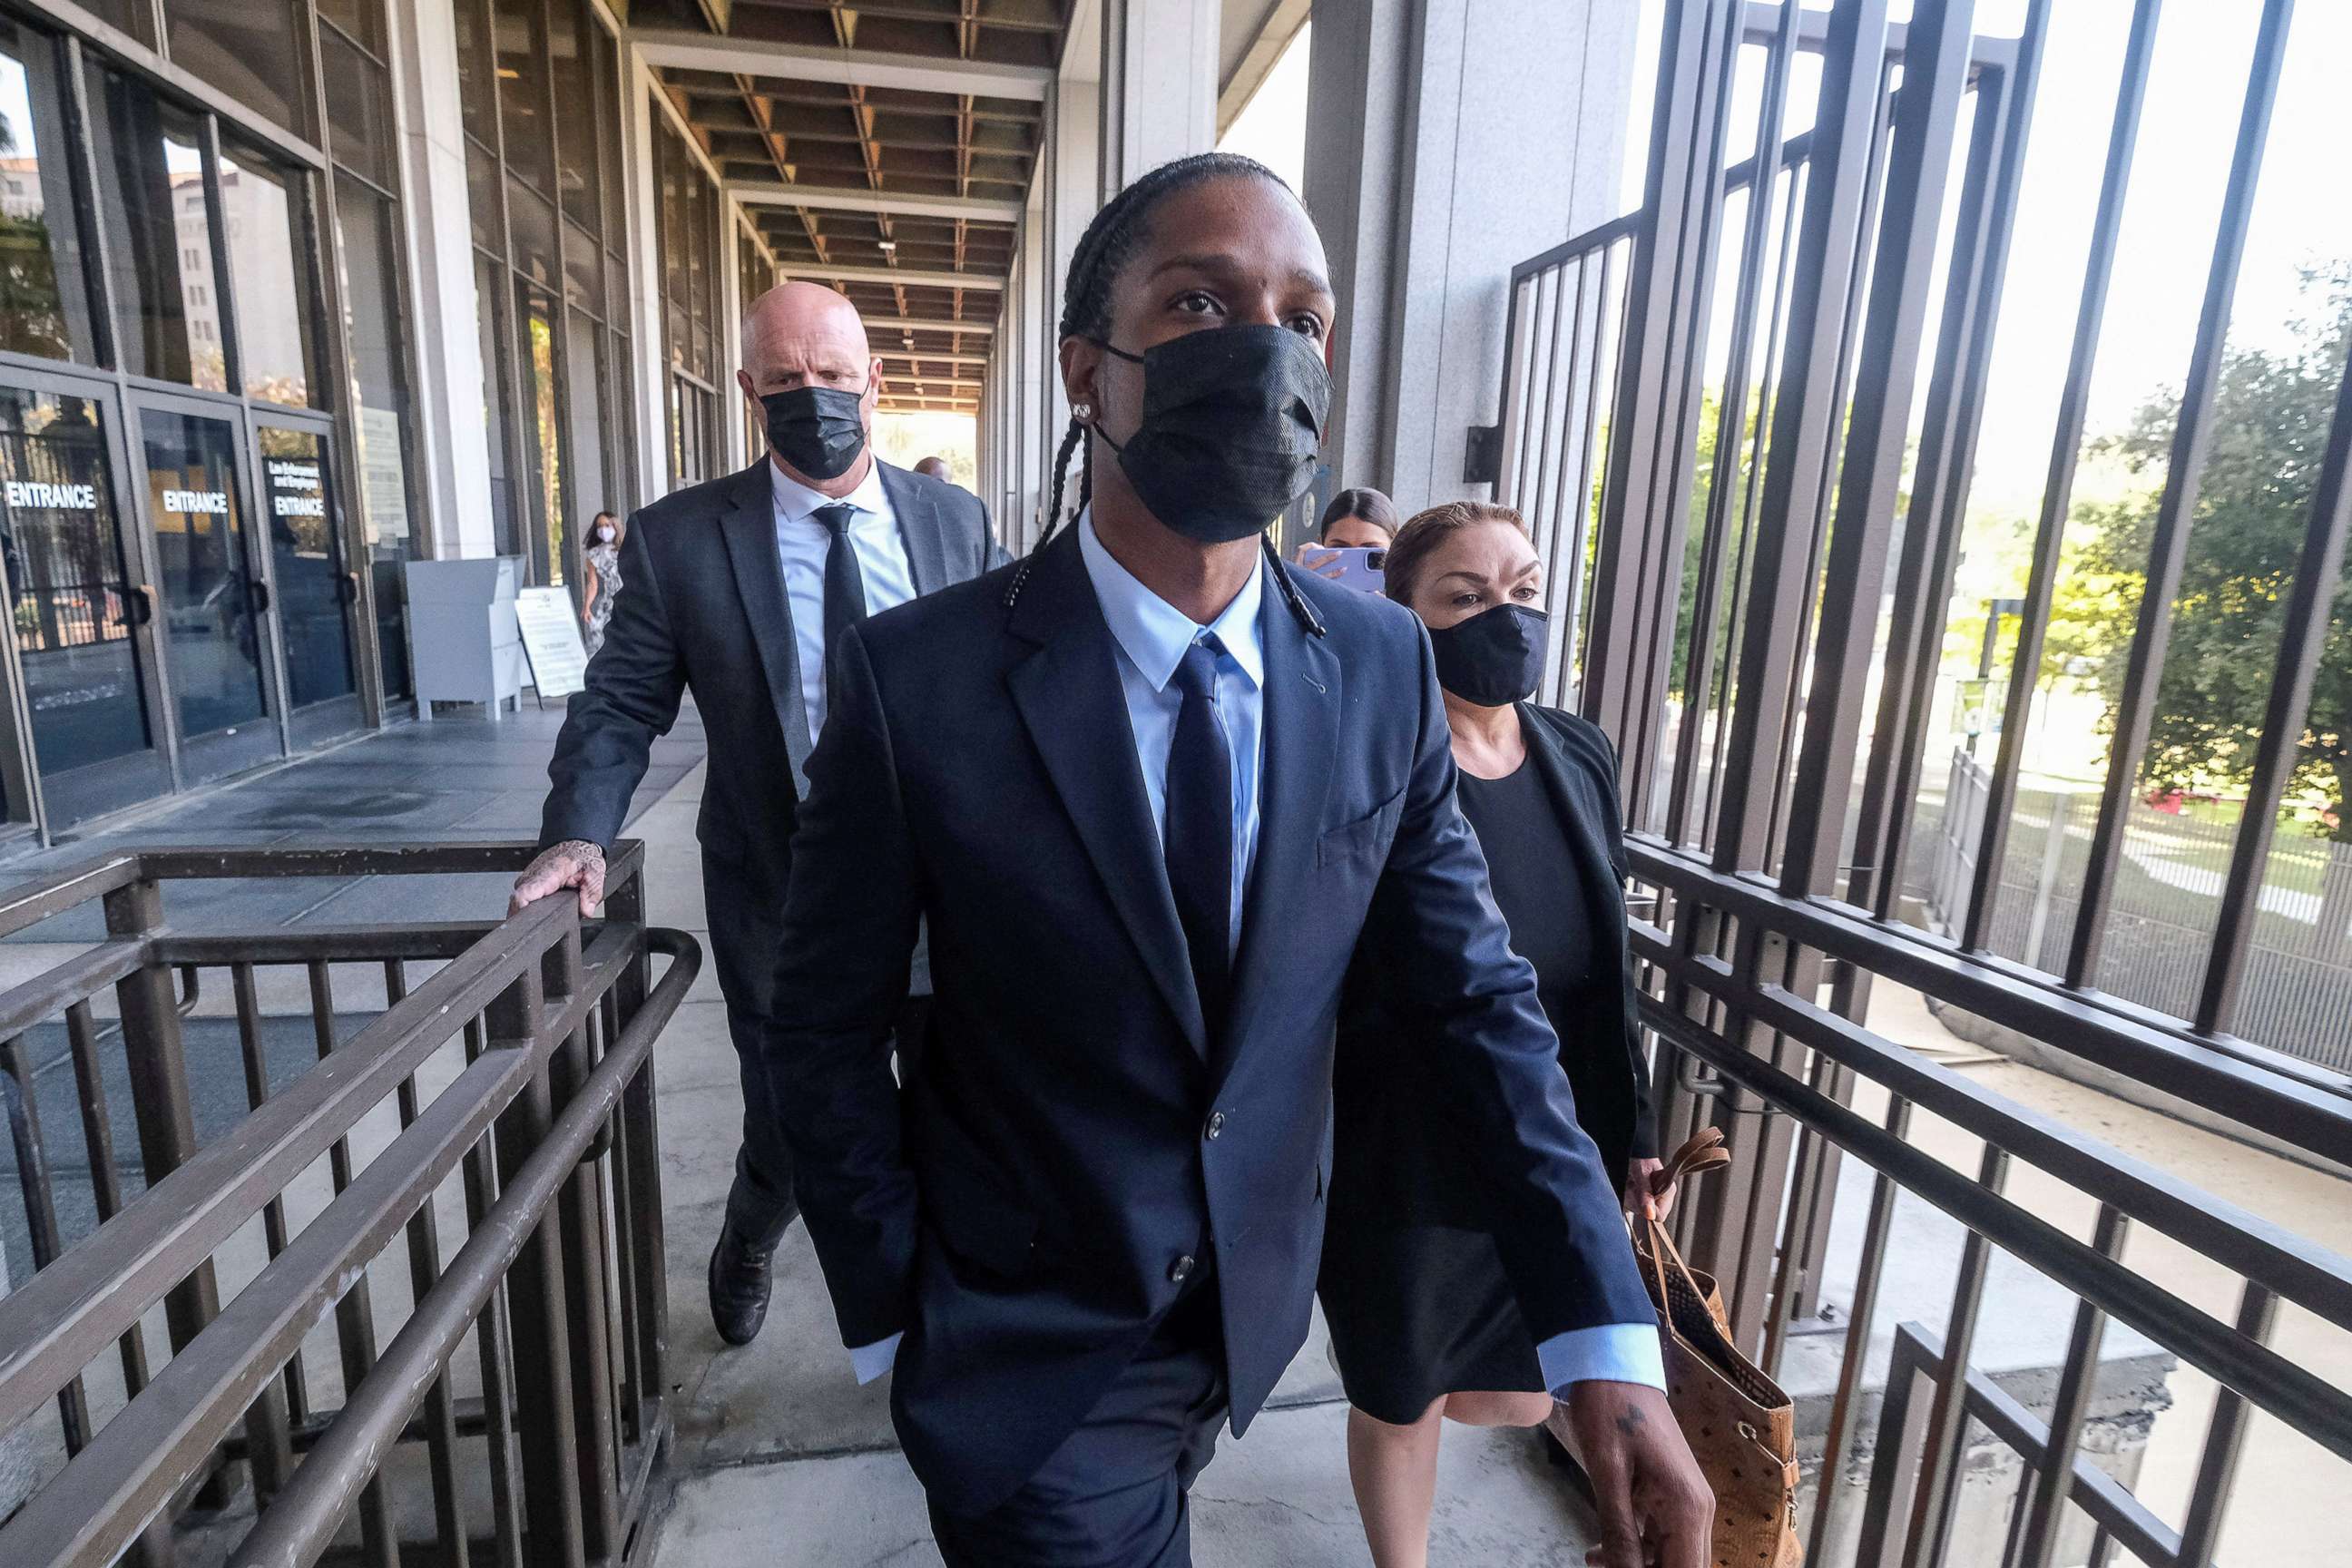 PHOTO: Rapper A$AP Rocky, also known as Rakim Mayers, leaves after his arraignment hearing on charges of assault with a firearm, in Los Angeles, Aug. 17, 2022.